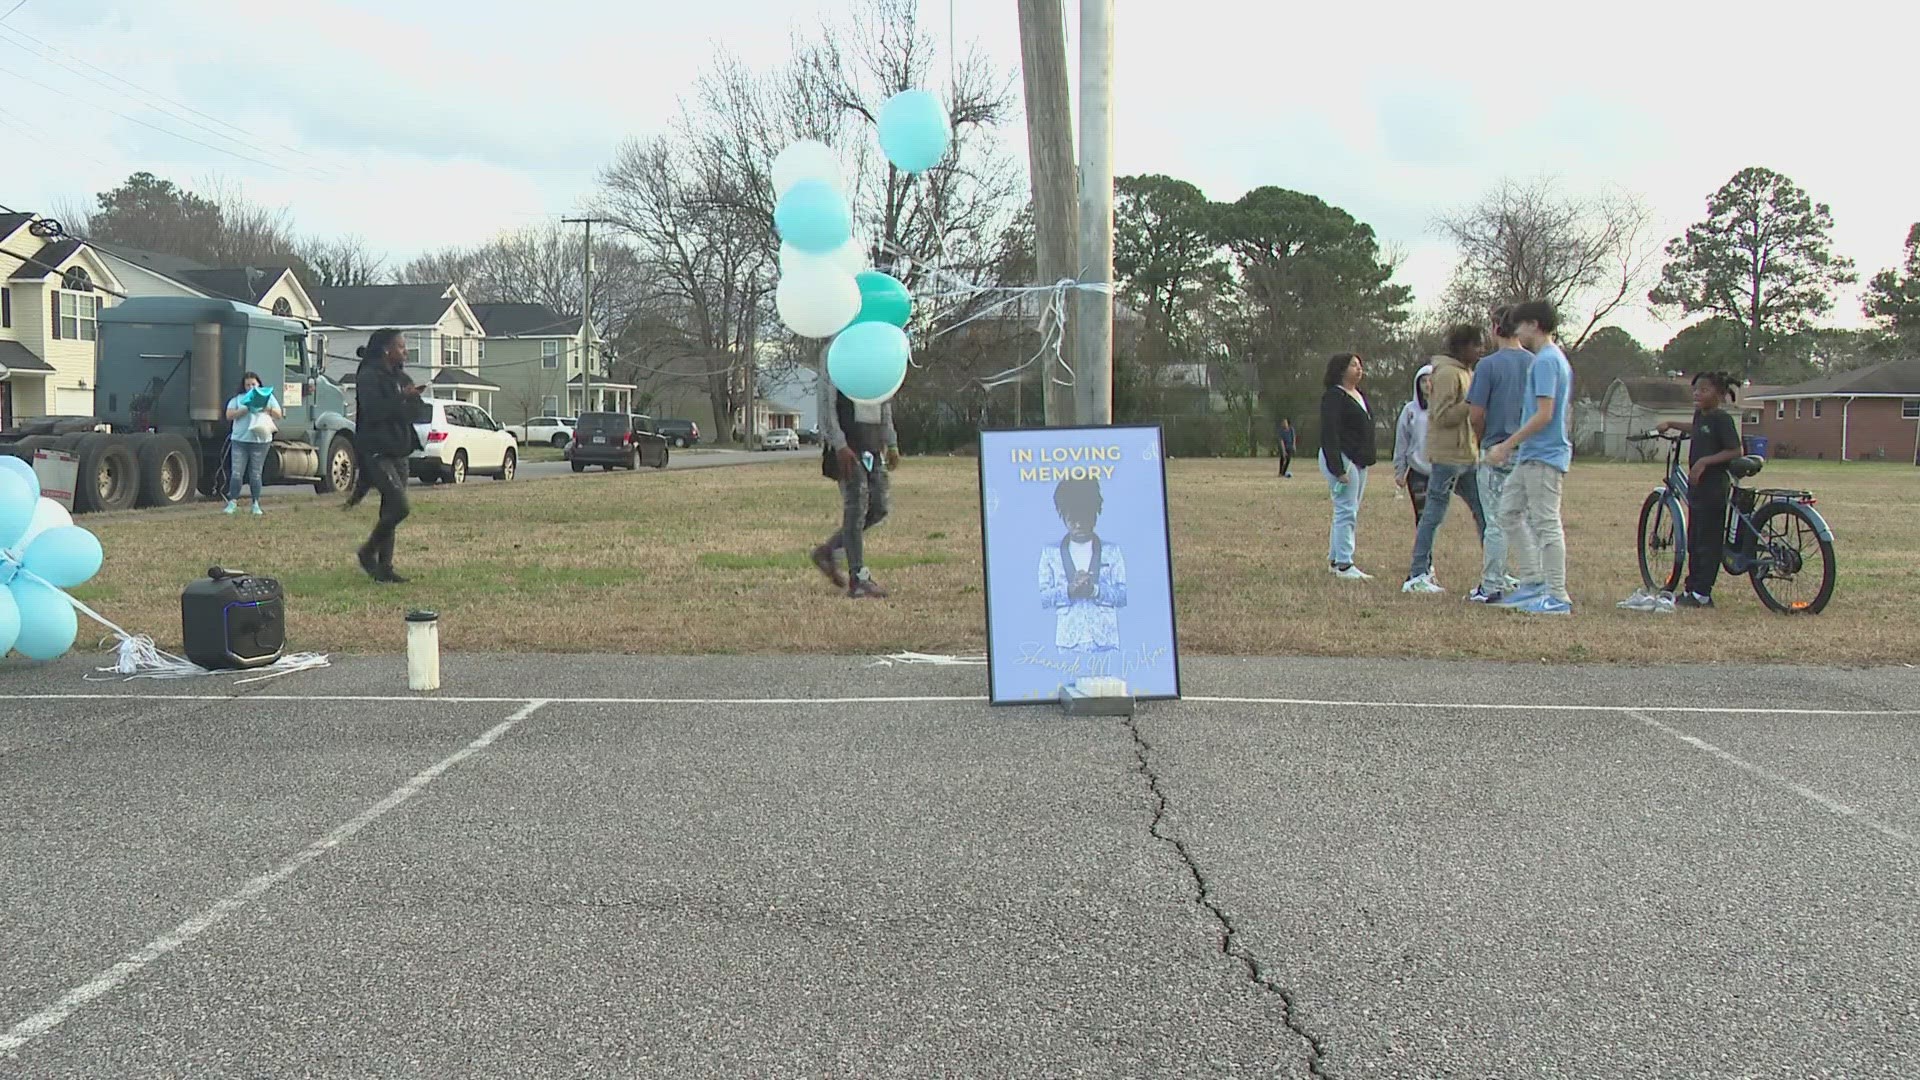 Portsmouth police say someone shot Shanarde Wilson on North Street in Old Towne last Saturday. On Friday, friends and family held a vigil in his honor.